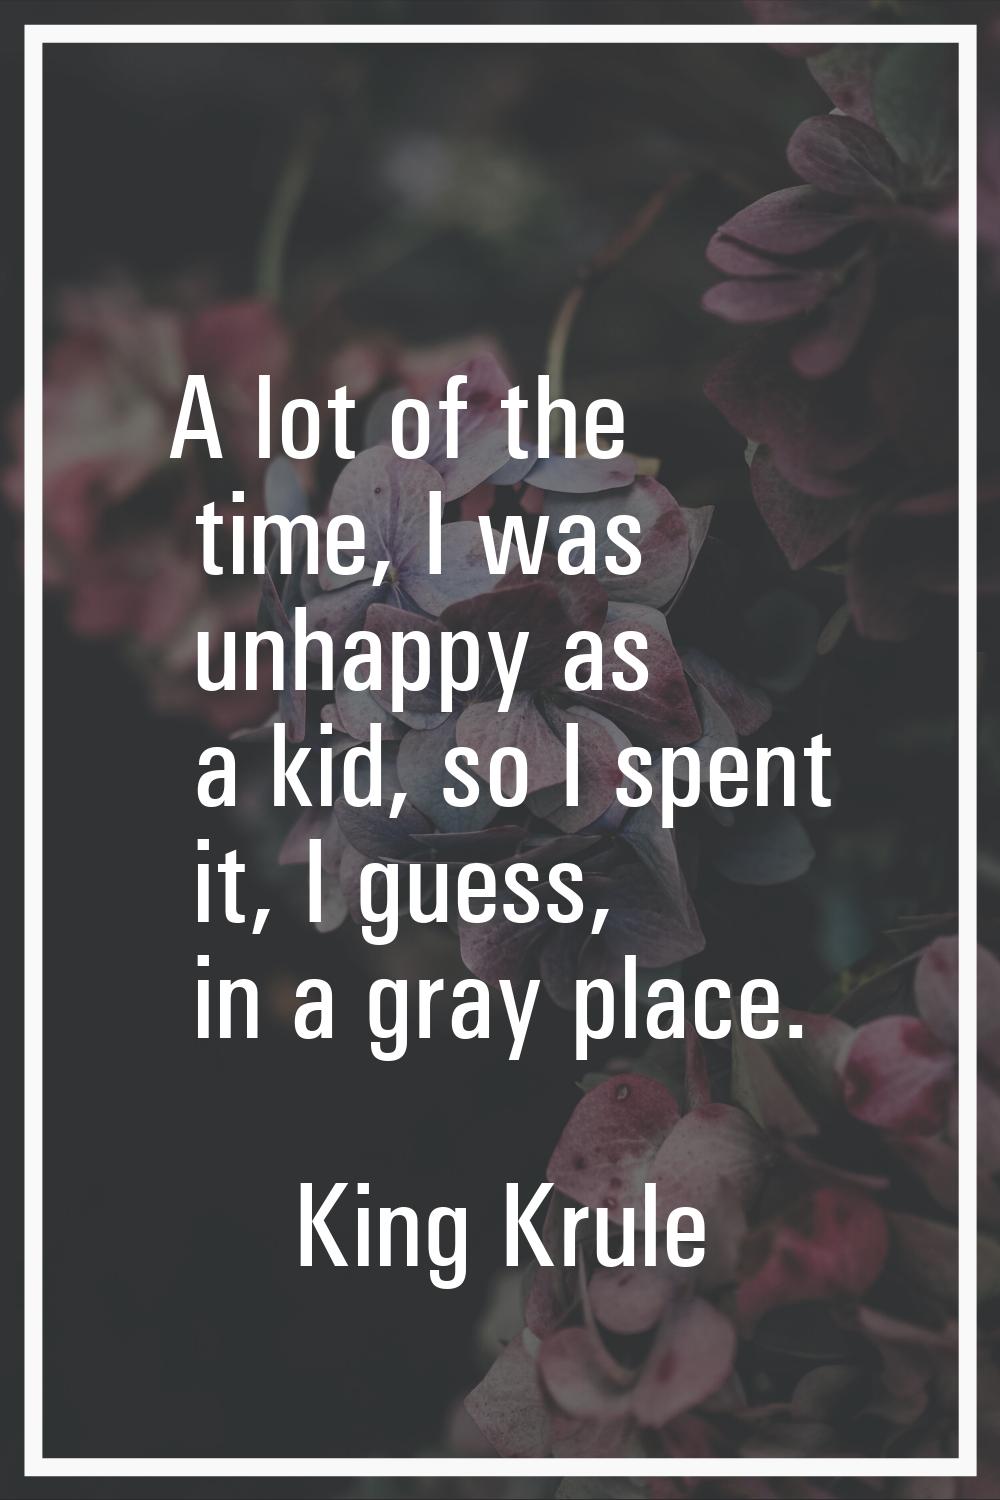 A lot of the time, I was unhappy as a kid, so I spent it, I guess, in a gray place.